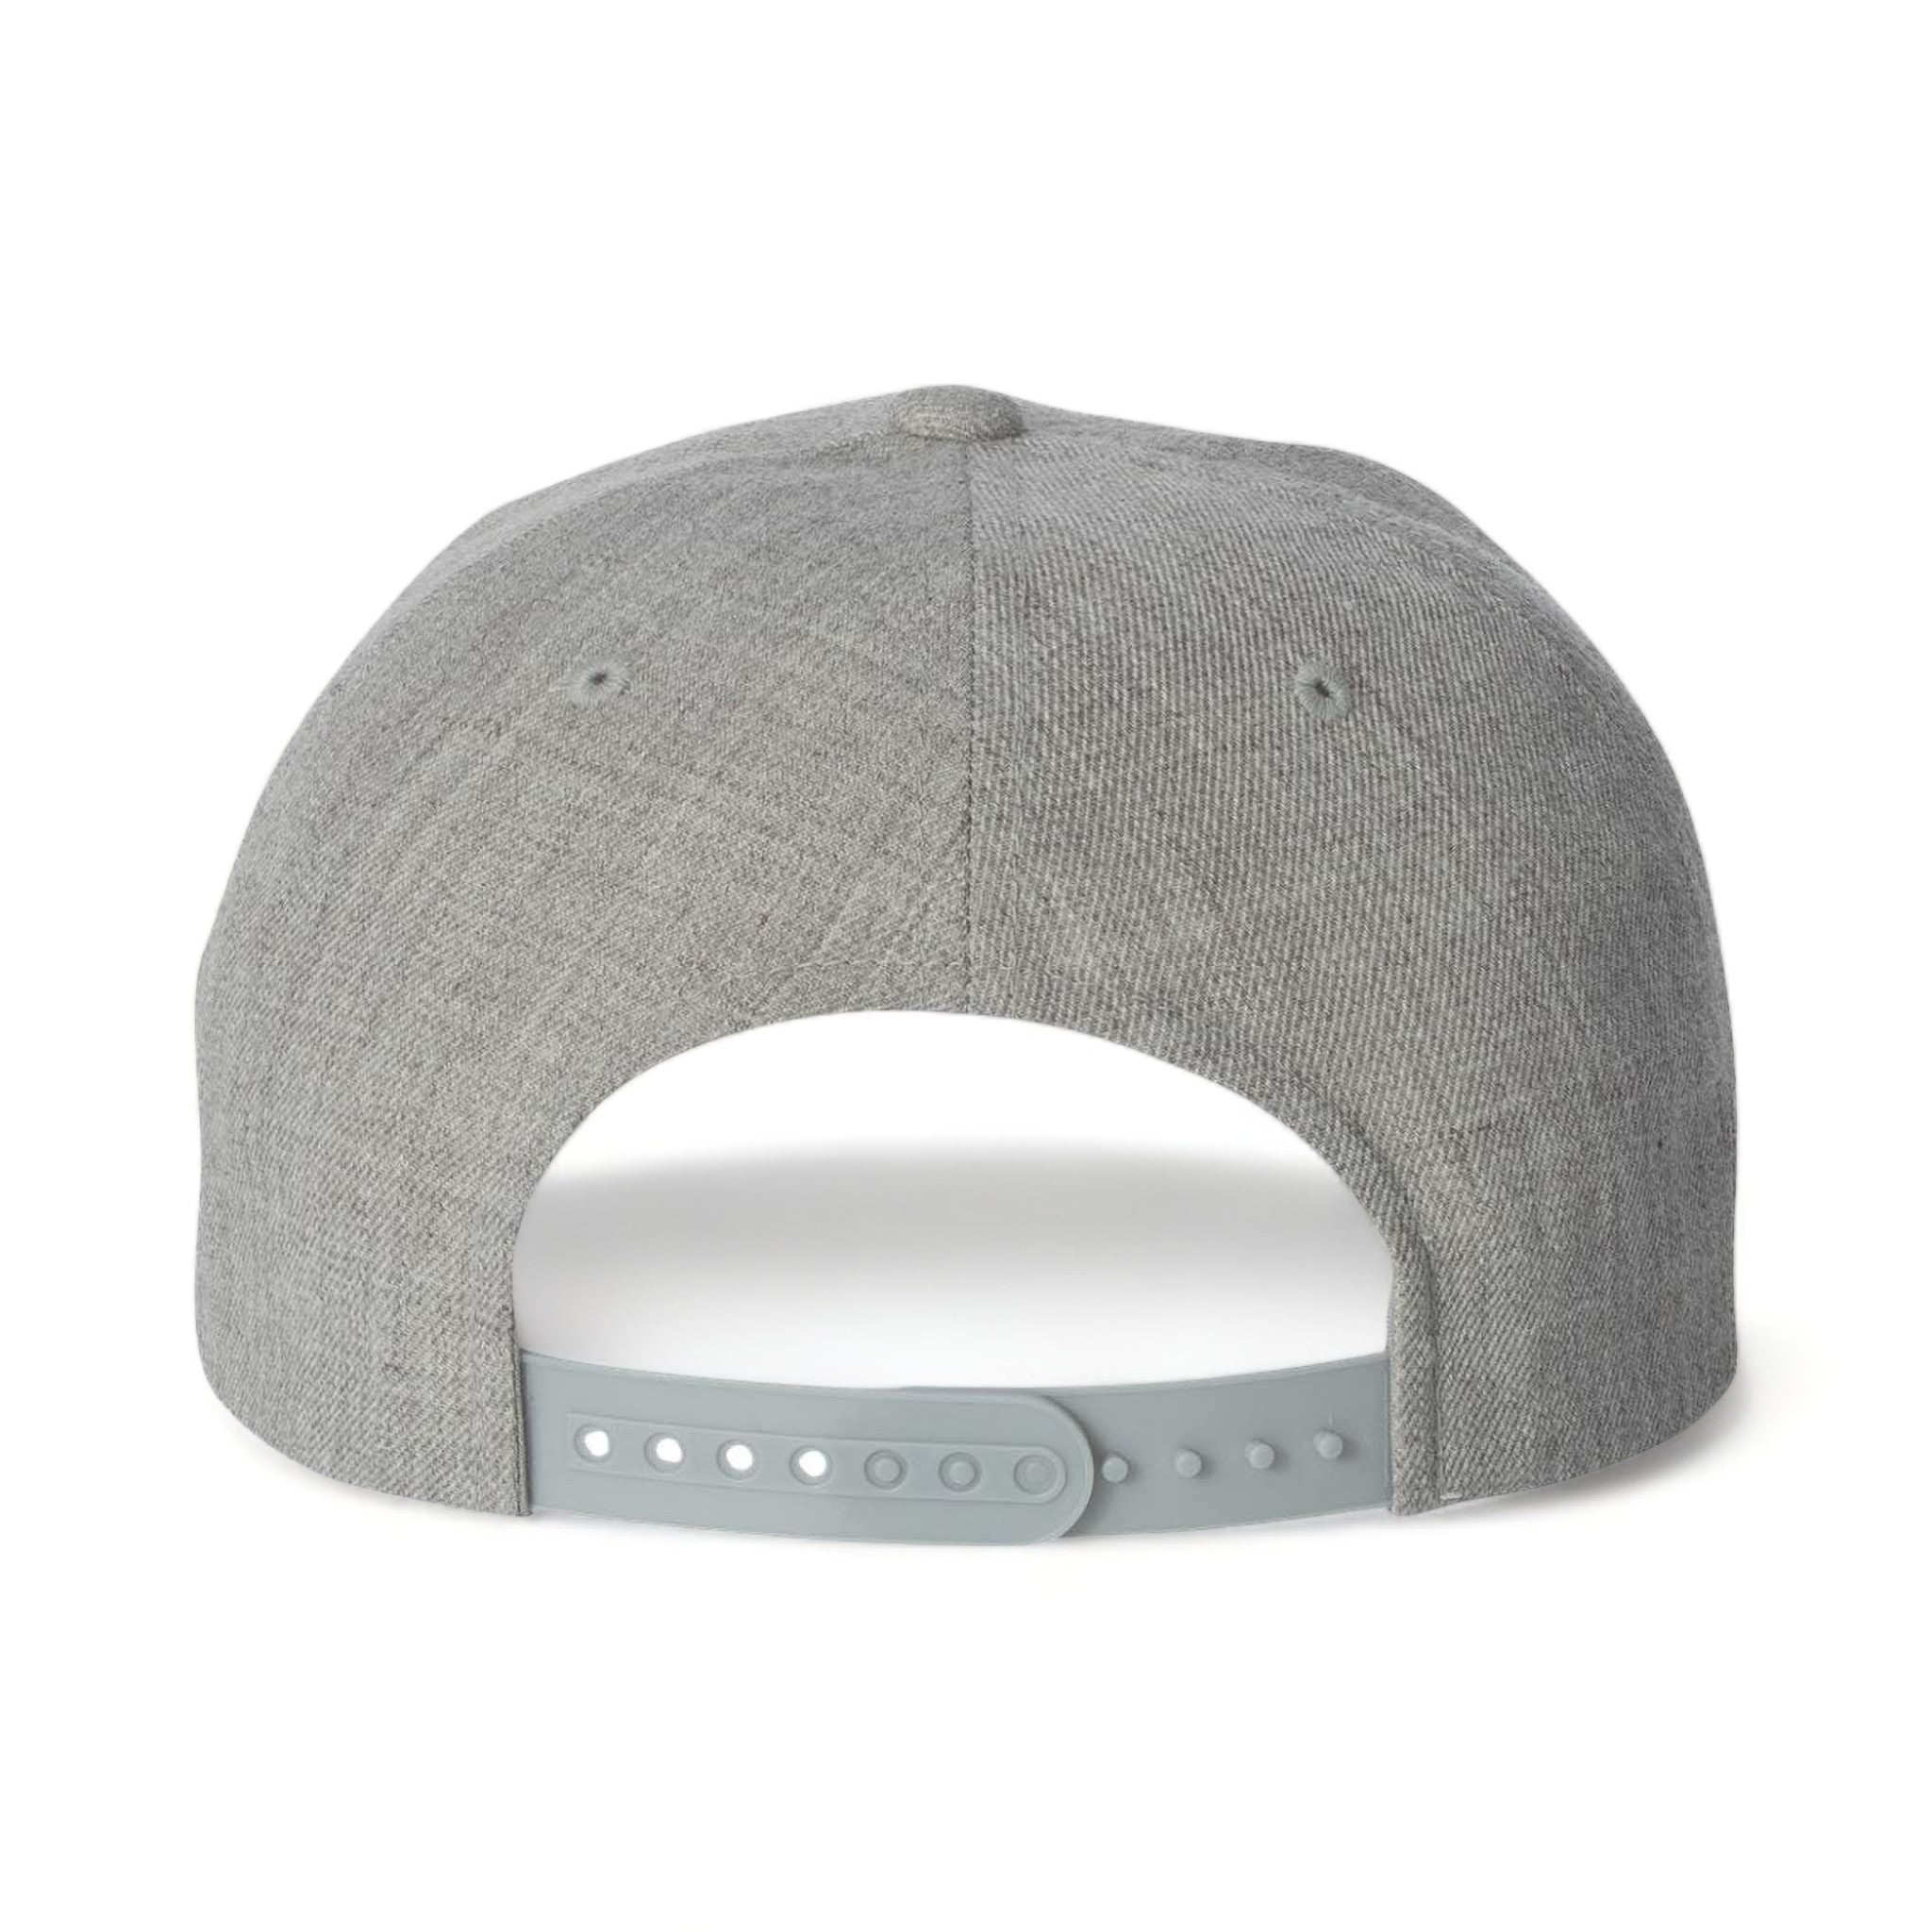 Back view of YP Classics 6089M custom hat in heather grey